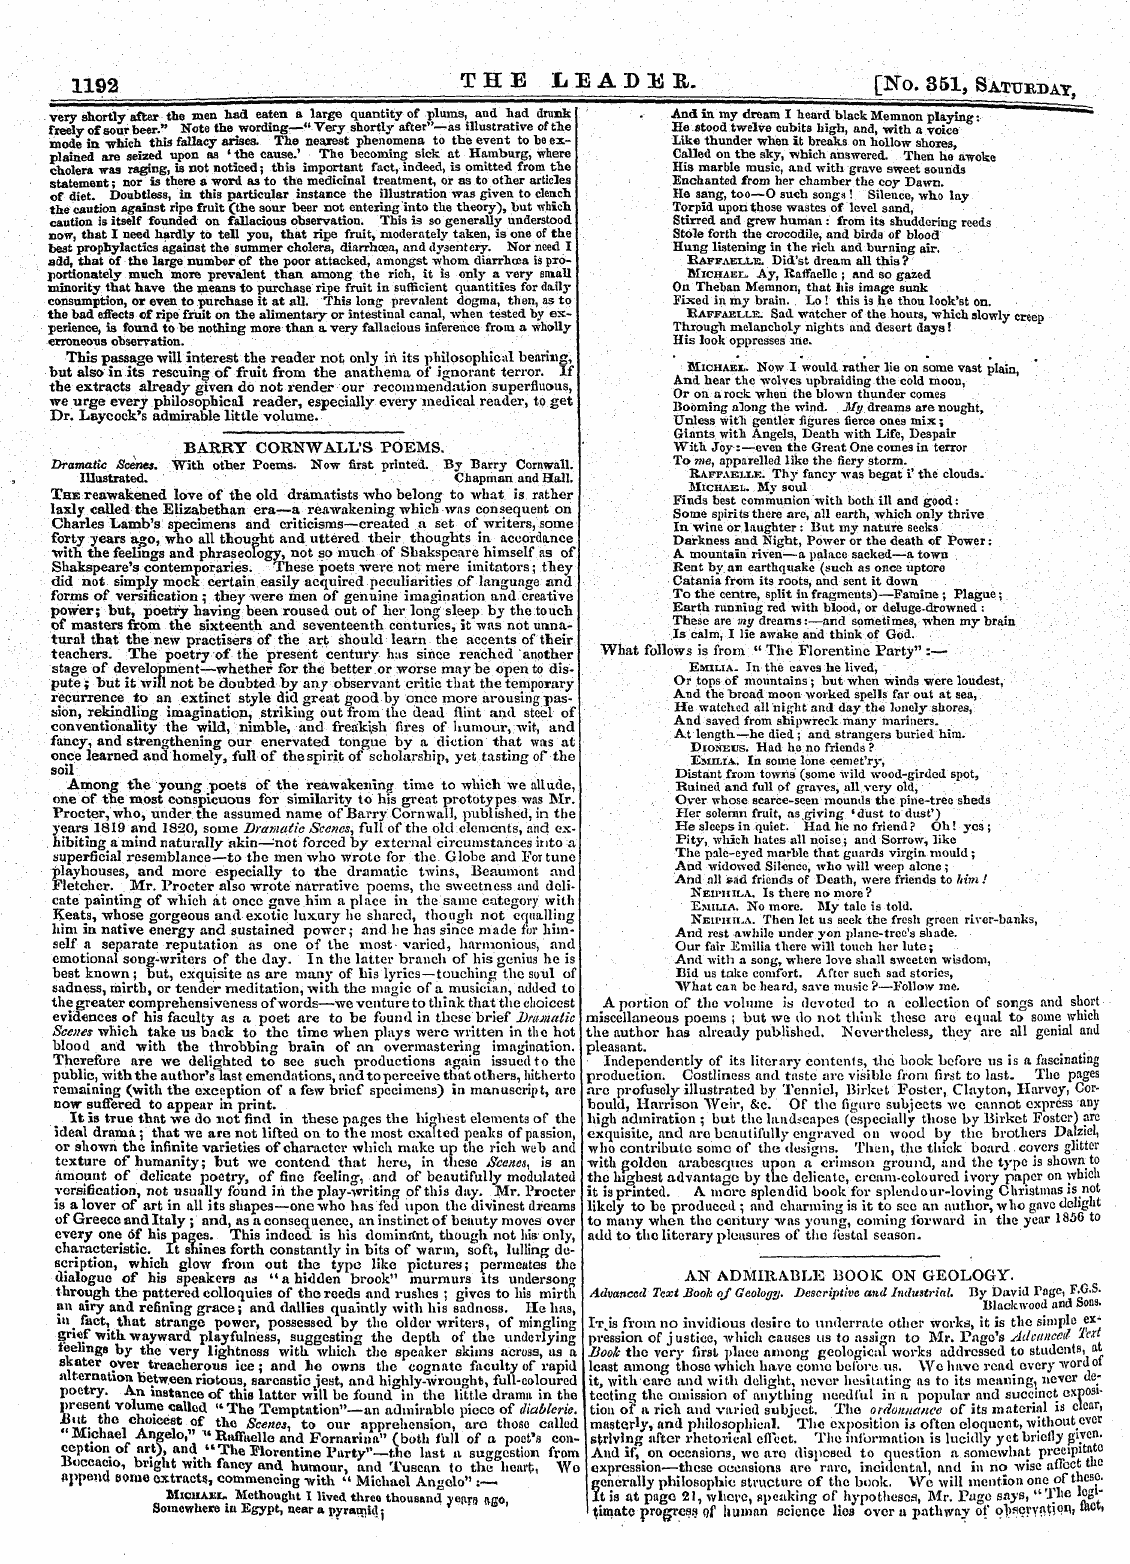 Leader (1850-1860): jS F Y, 2nd edition: 16